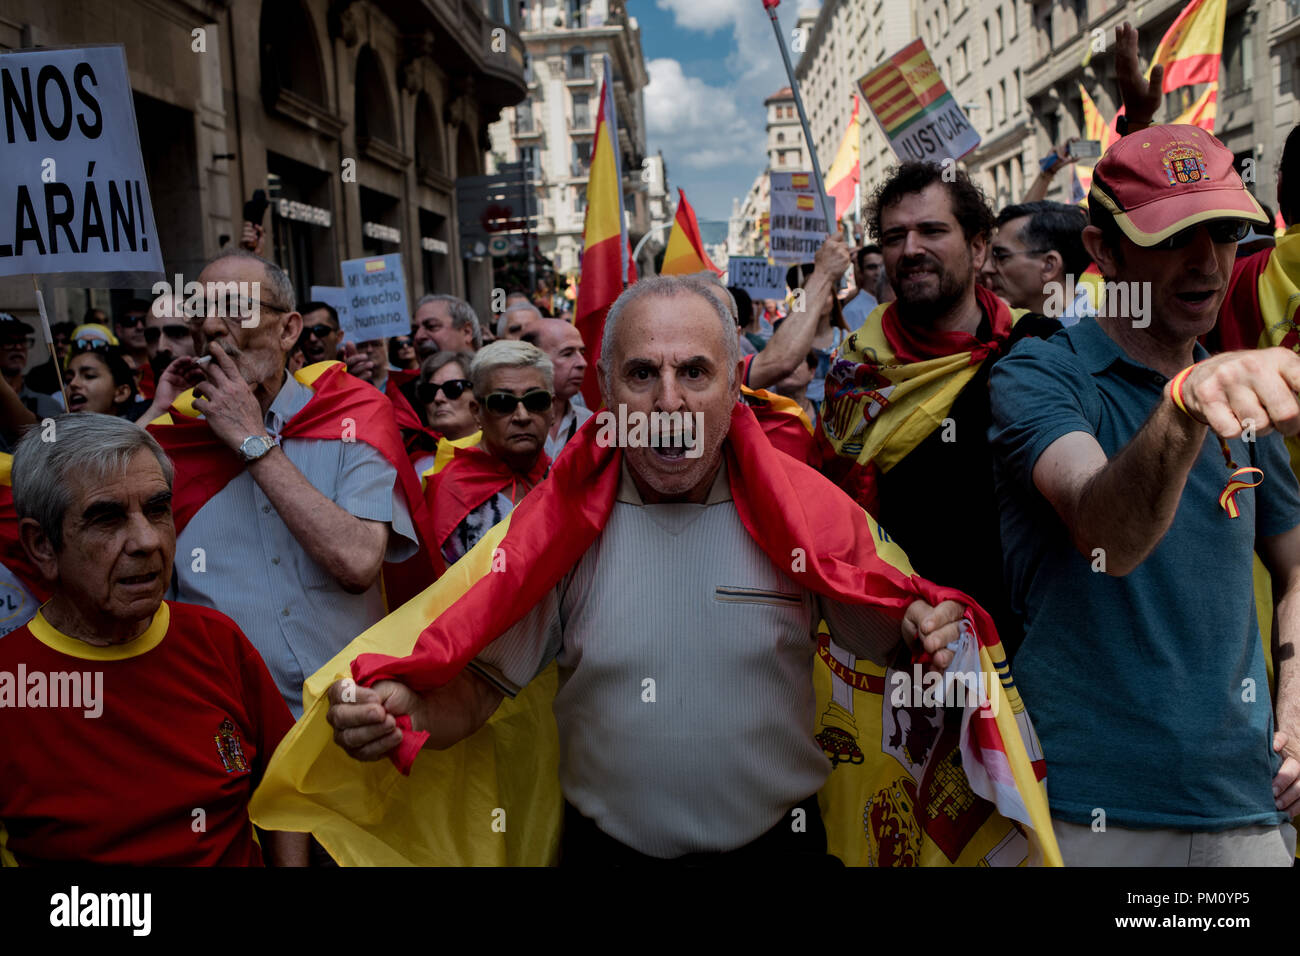 Barcelona, Spain. 16 September 2018.  Protesters called by unionist organizations shout slogans against pro-independence supporters separed from them by a securtity police cordon.  Demonstrators marched in support of the use of the Spanish language and against the Language immersion system, a technique using bilingual language education (Catalan and Spanish) in the Catalan schools. Credit:  Jordi Boixareu/Alamy Live News Stock Photo